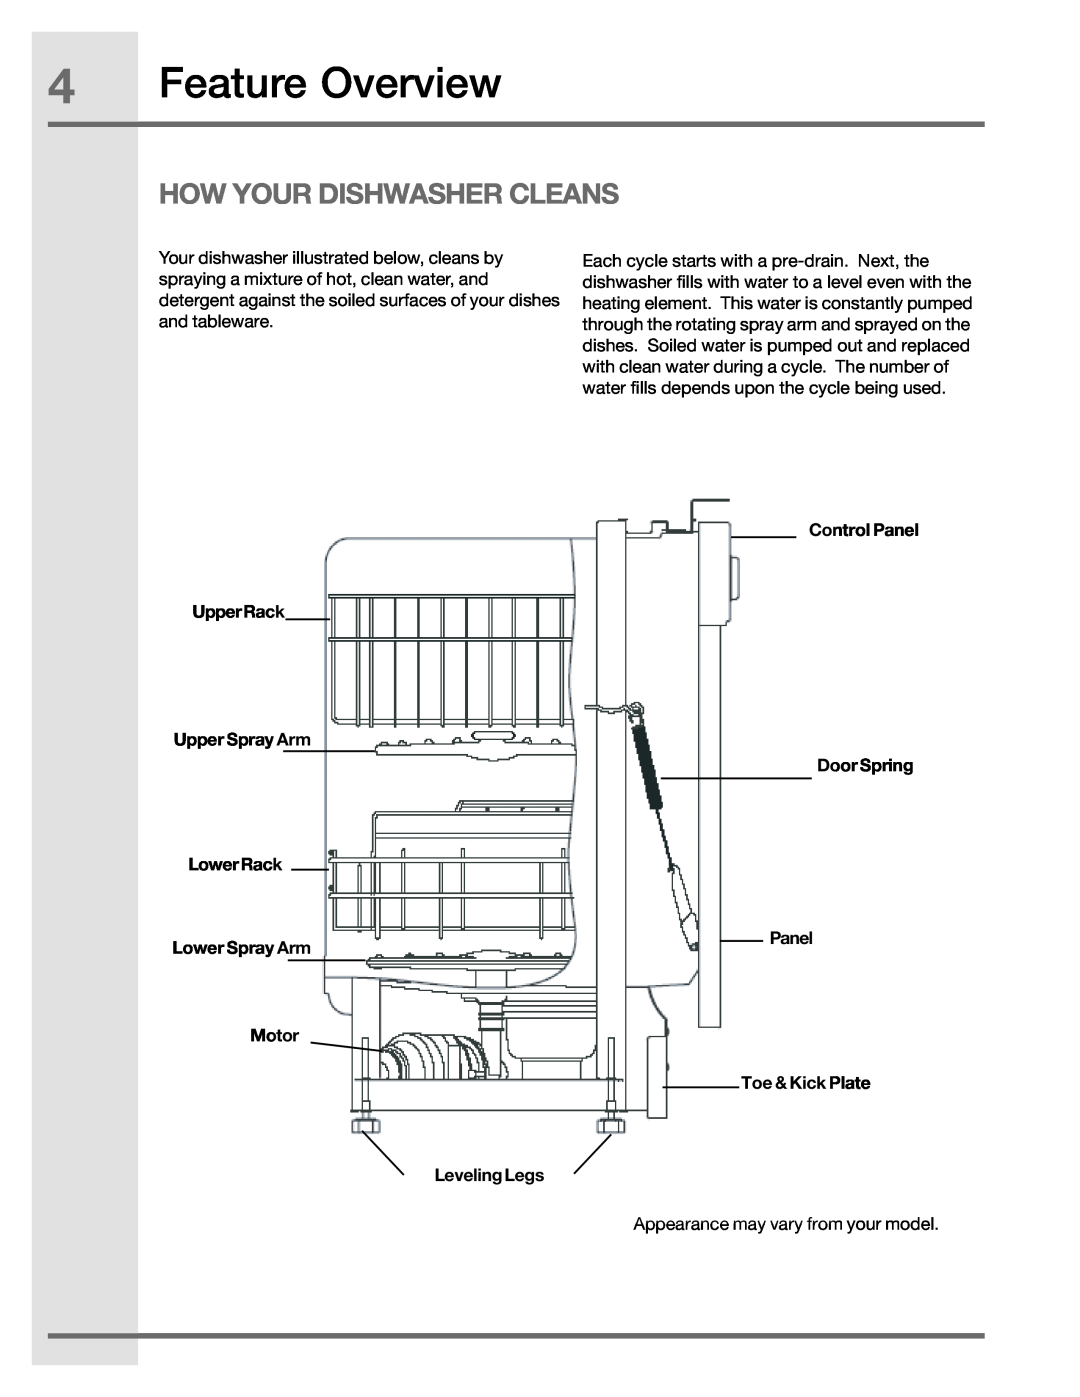 Electrolux 6.75E+11, 2001/05 manual Feature Overview, How Your Dishwasher Cleans, Control Panel Door Spring Panel 